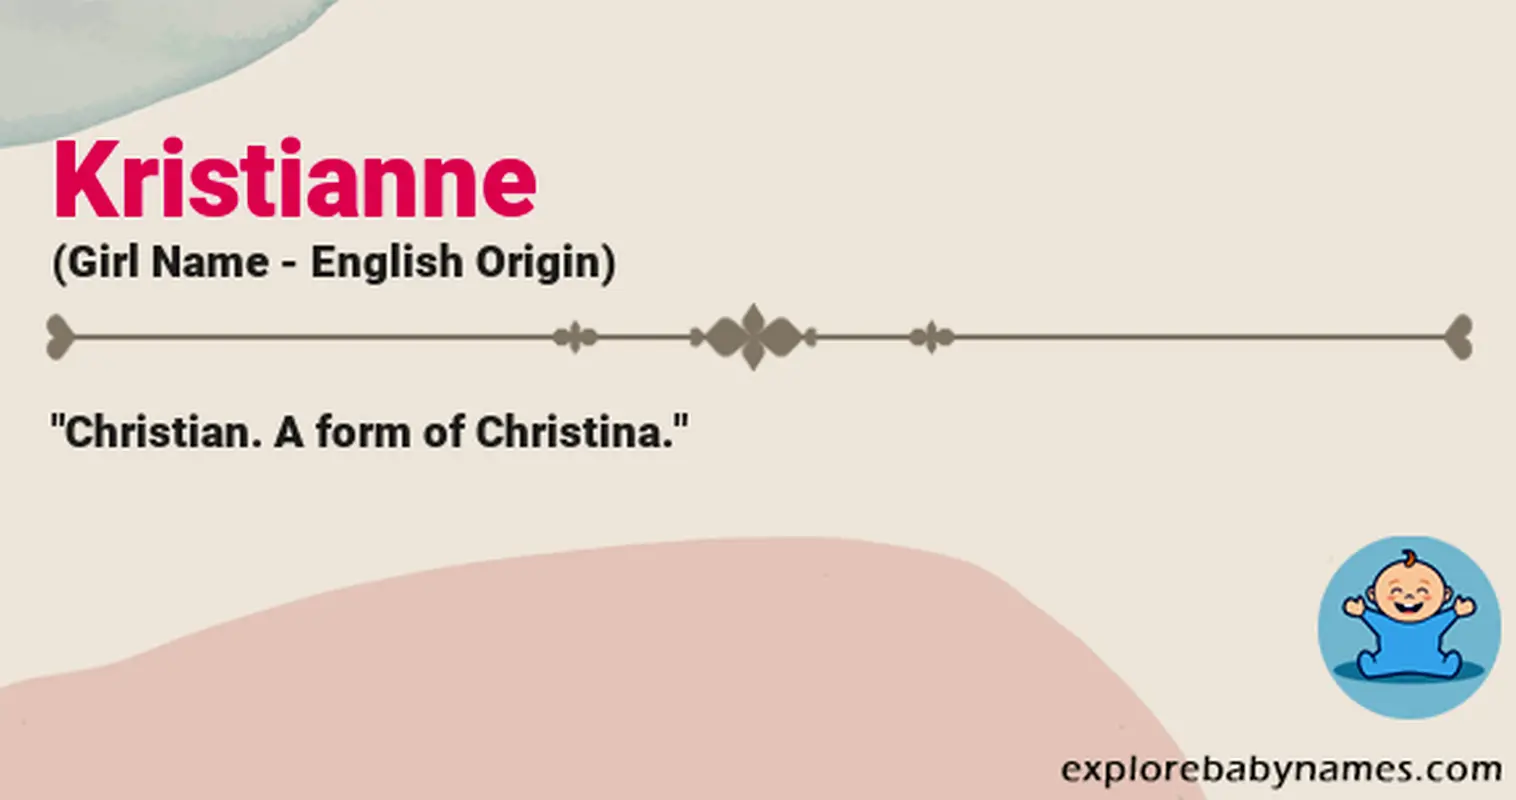 Meaning of Kristianne